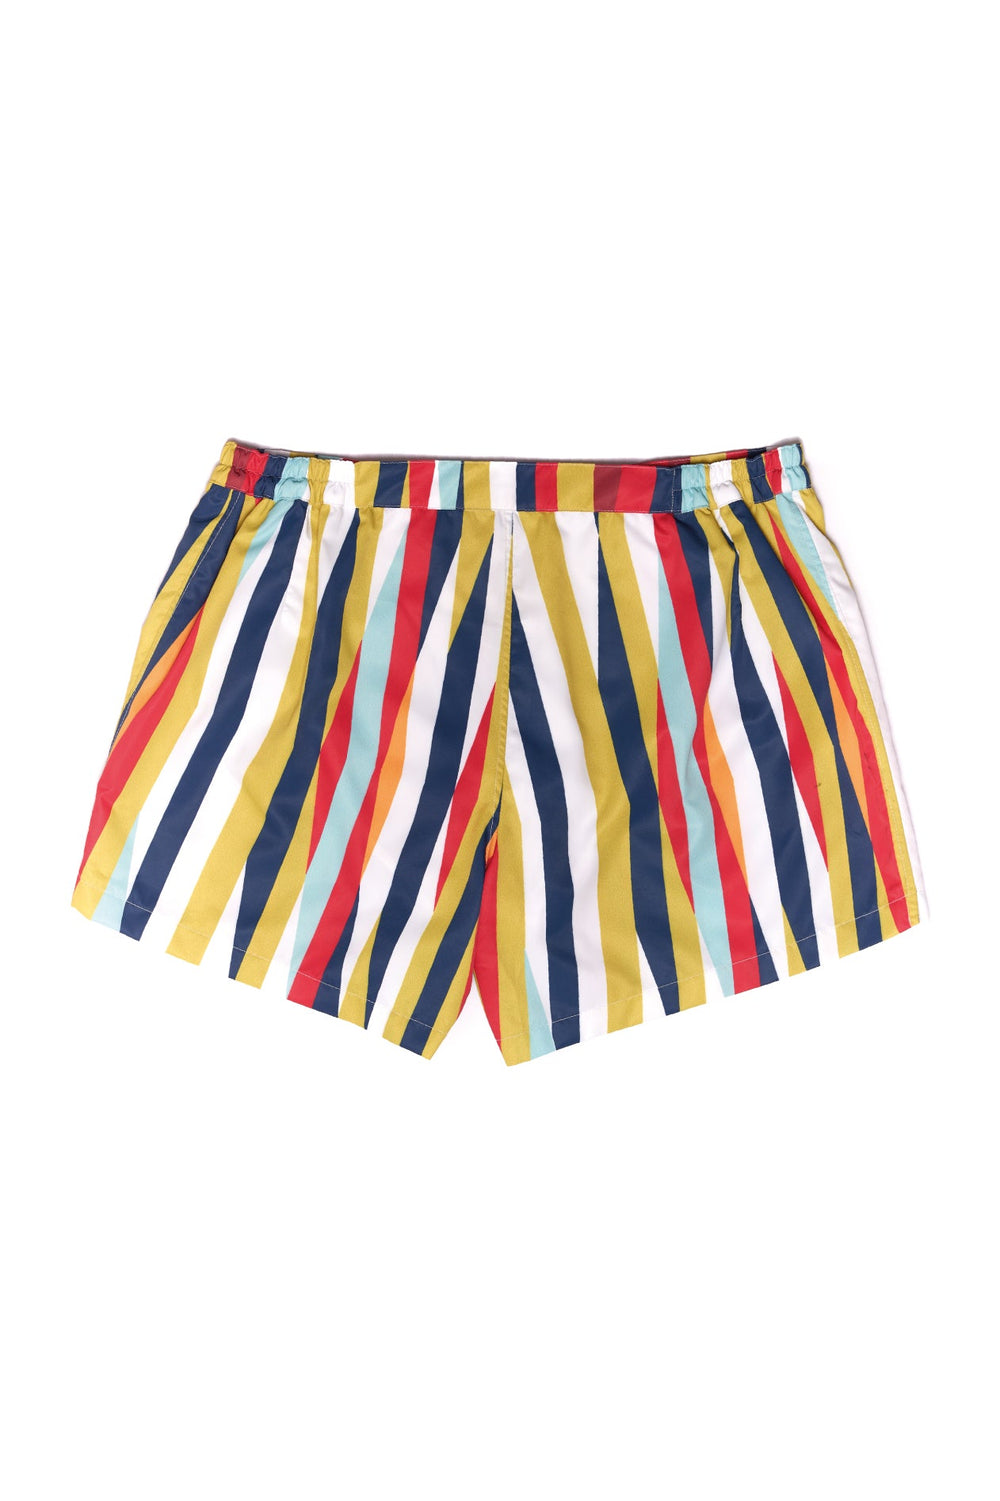 Colorful striped men's shorts with vertical multicolored stripes on a white background